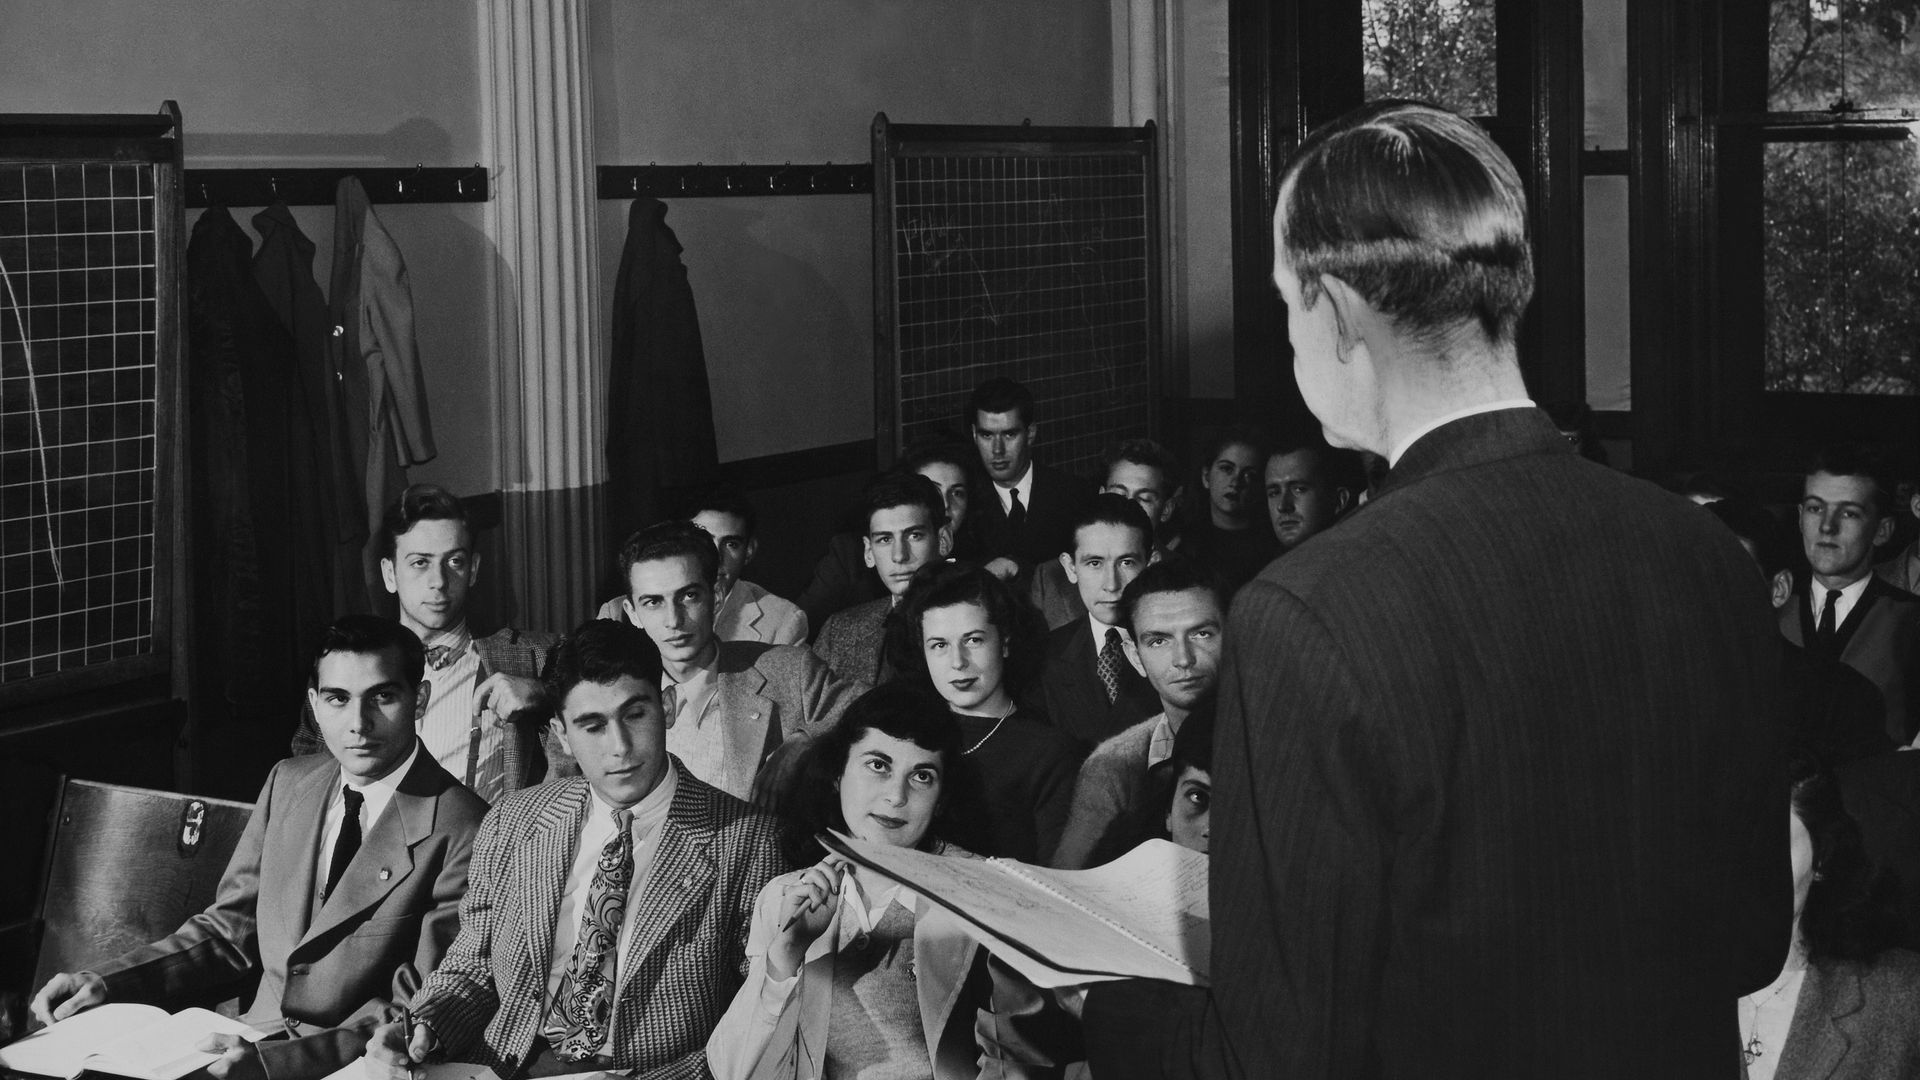 A lecturer stands before rows of students in a black and white photo